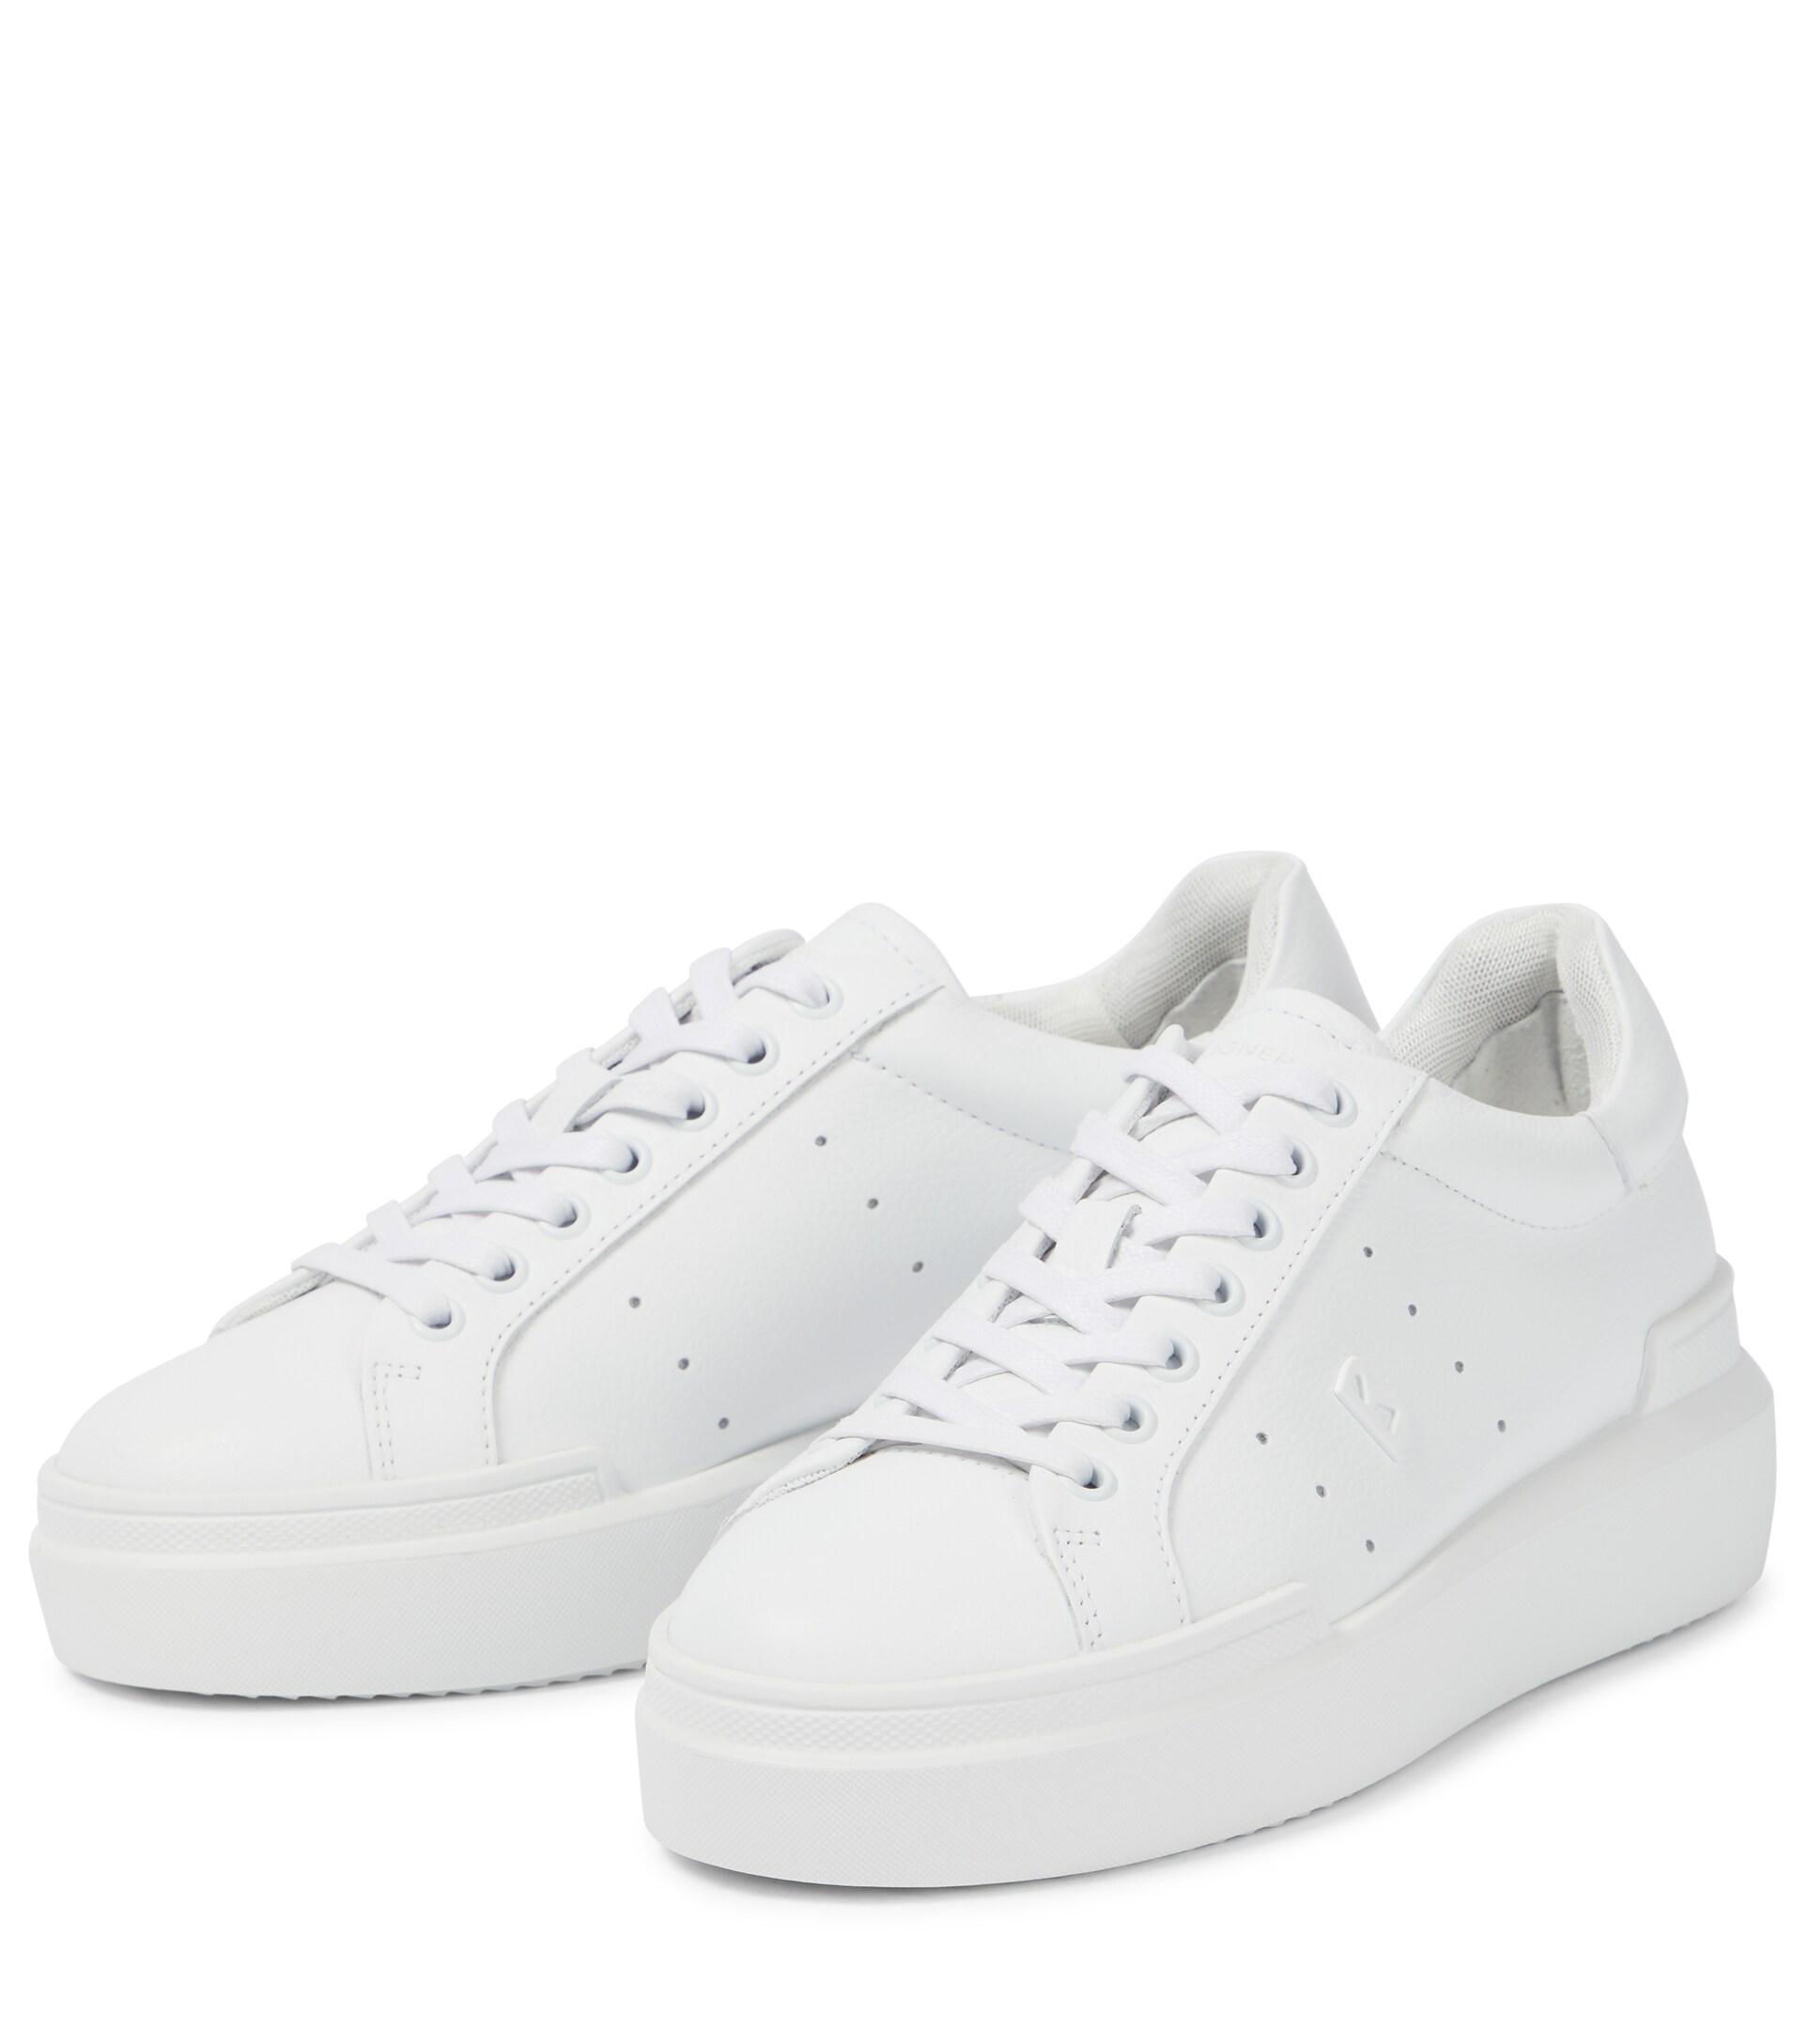 Bogner Hollywood Leather Sneakers in White | Lyst